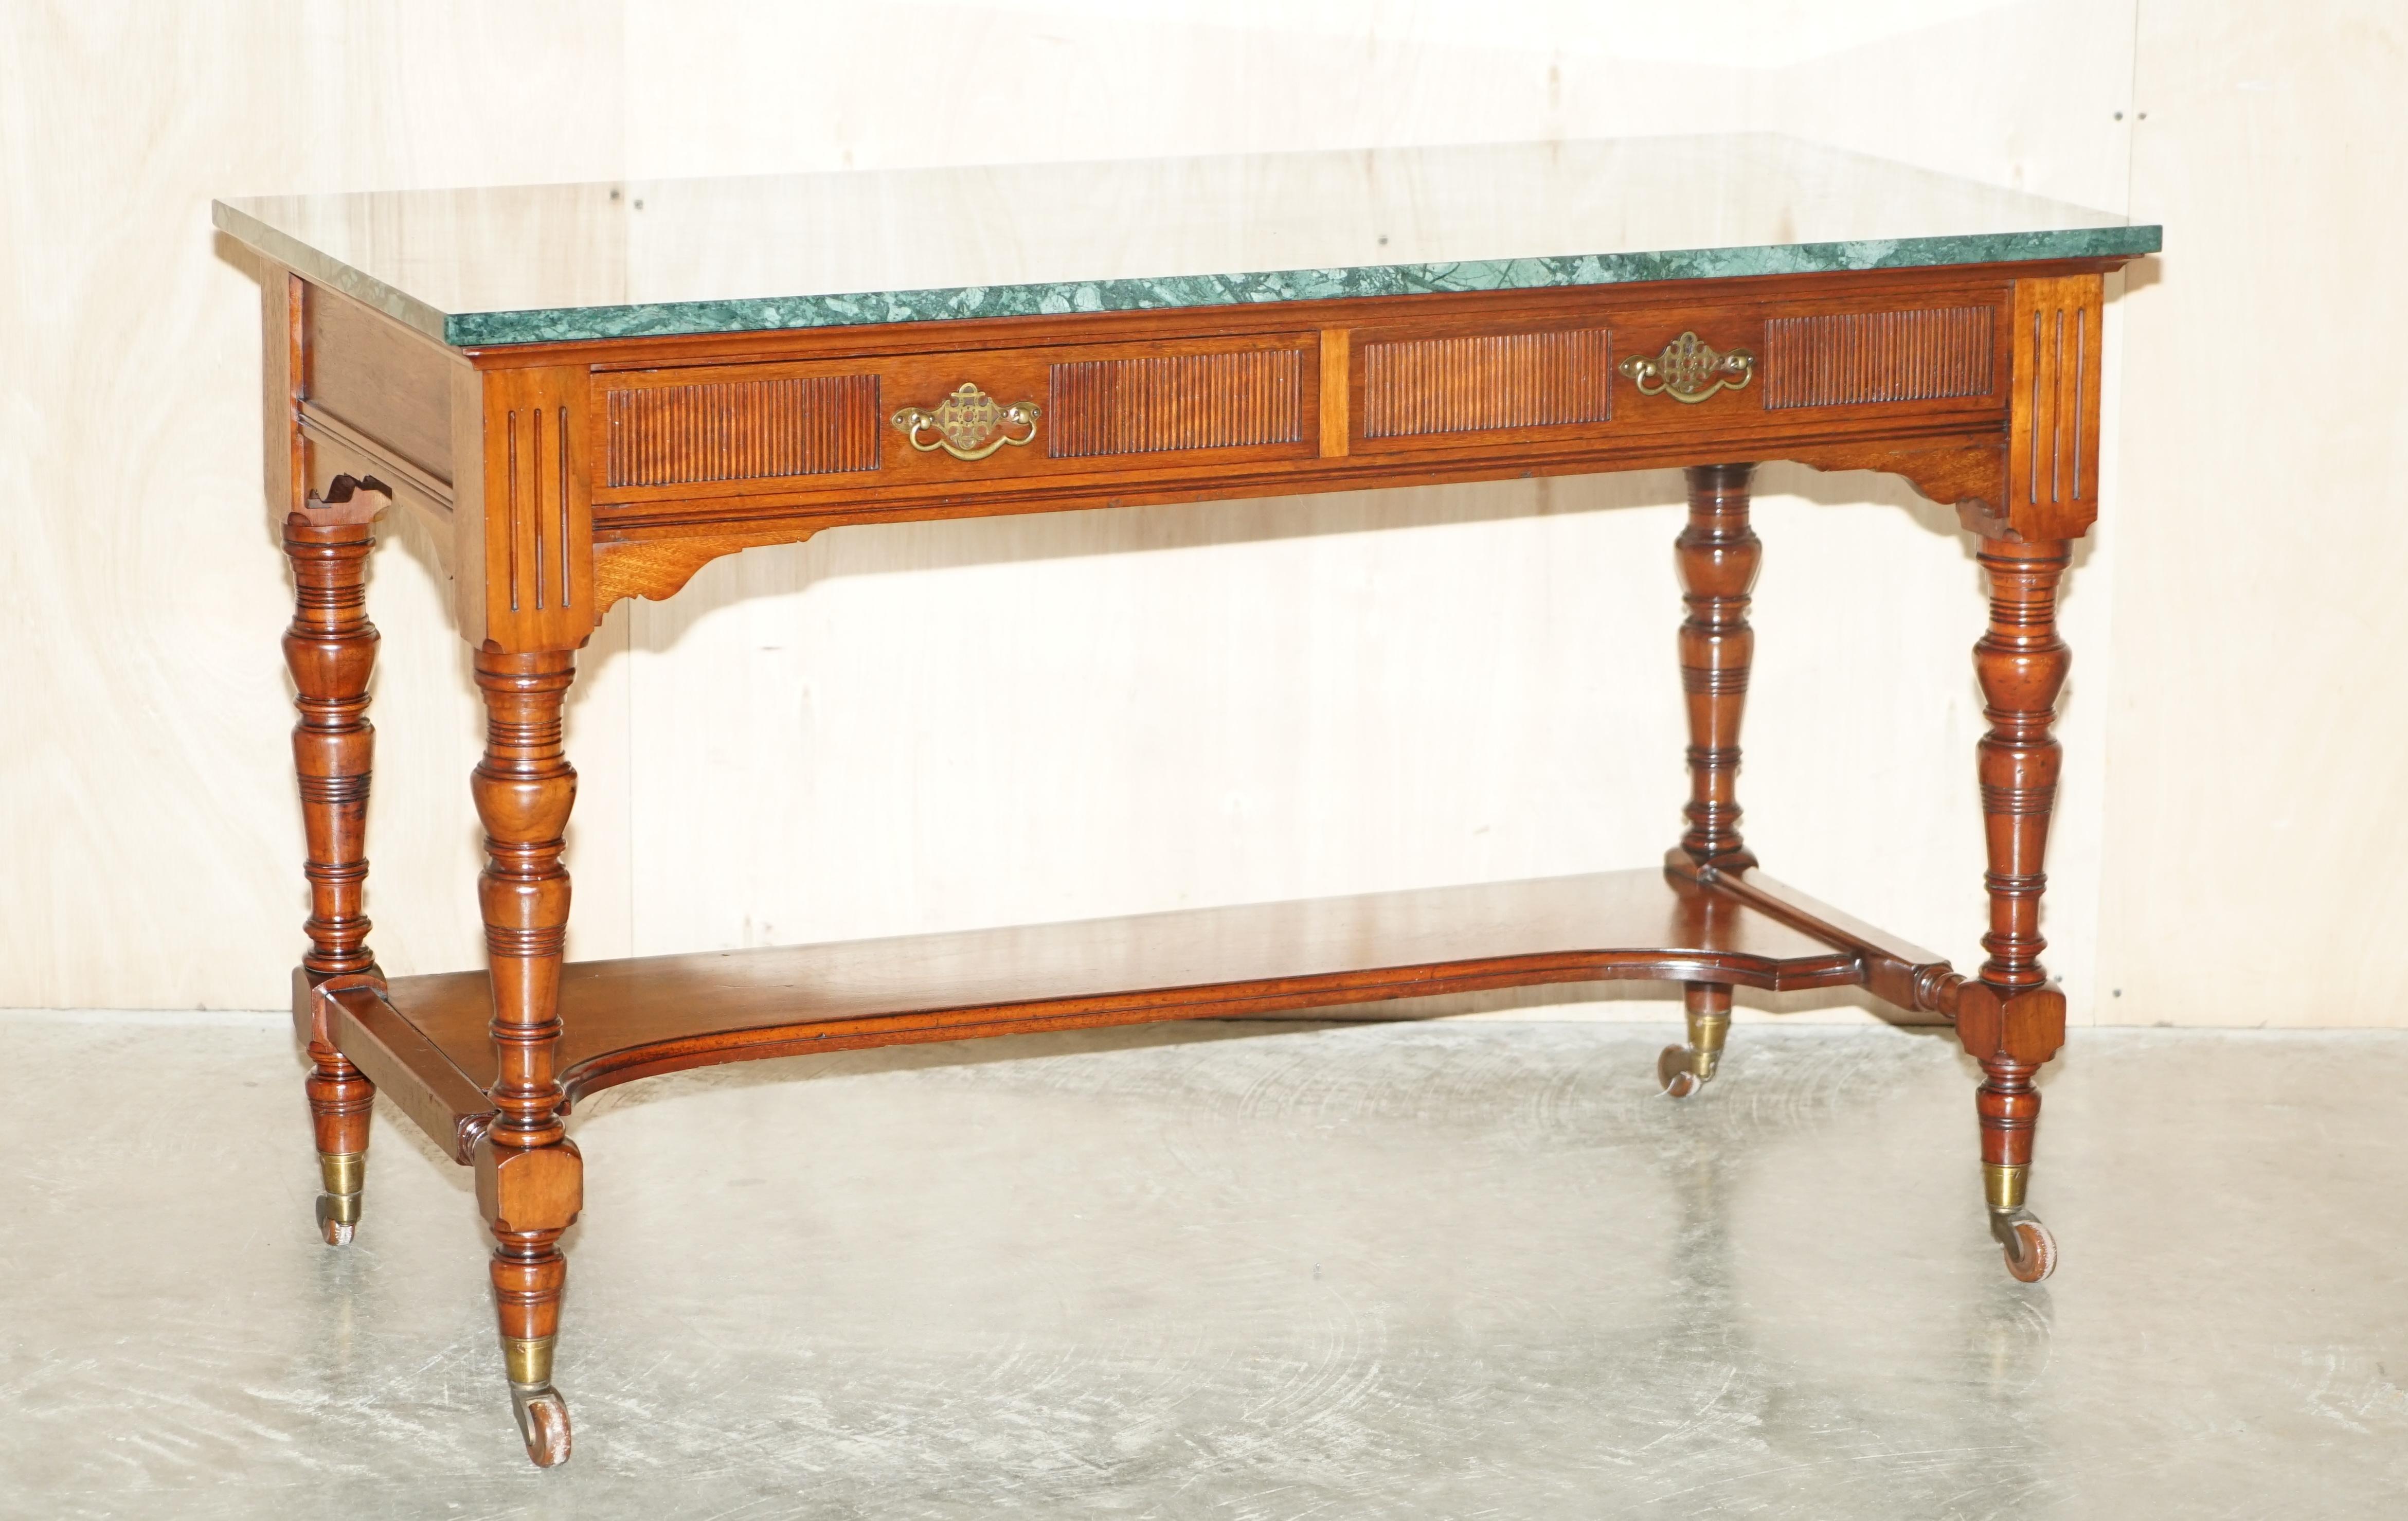 We are is delighted to offer for sale this absolutely stunning original Victorian circa 1880 James Jas Shoolbred Watchmakers table / desk with green marble top 

A good looking and well-made piece, the timber frame is late Victorian and has a